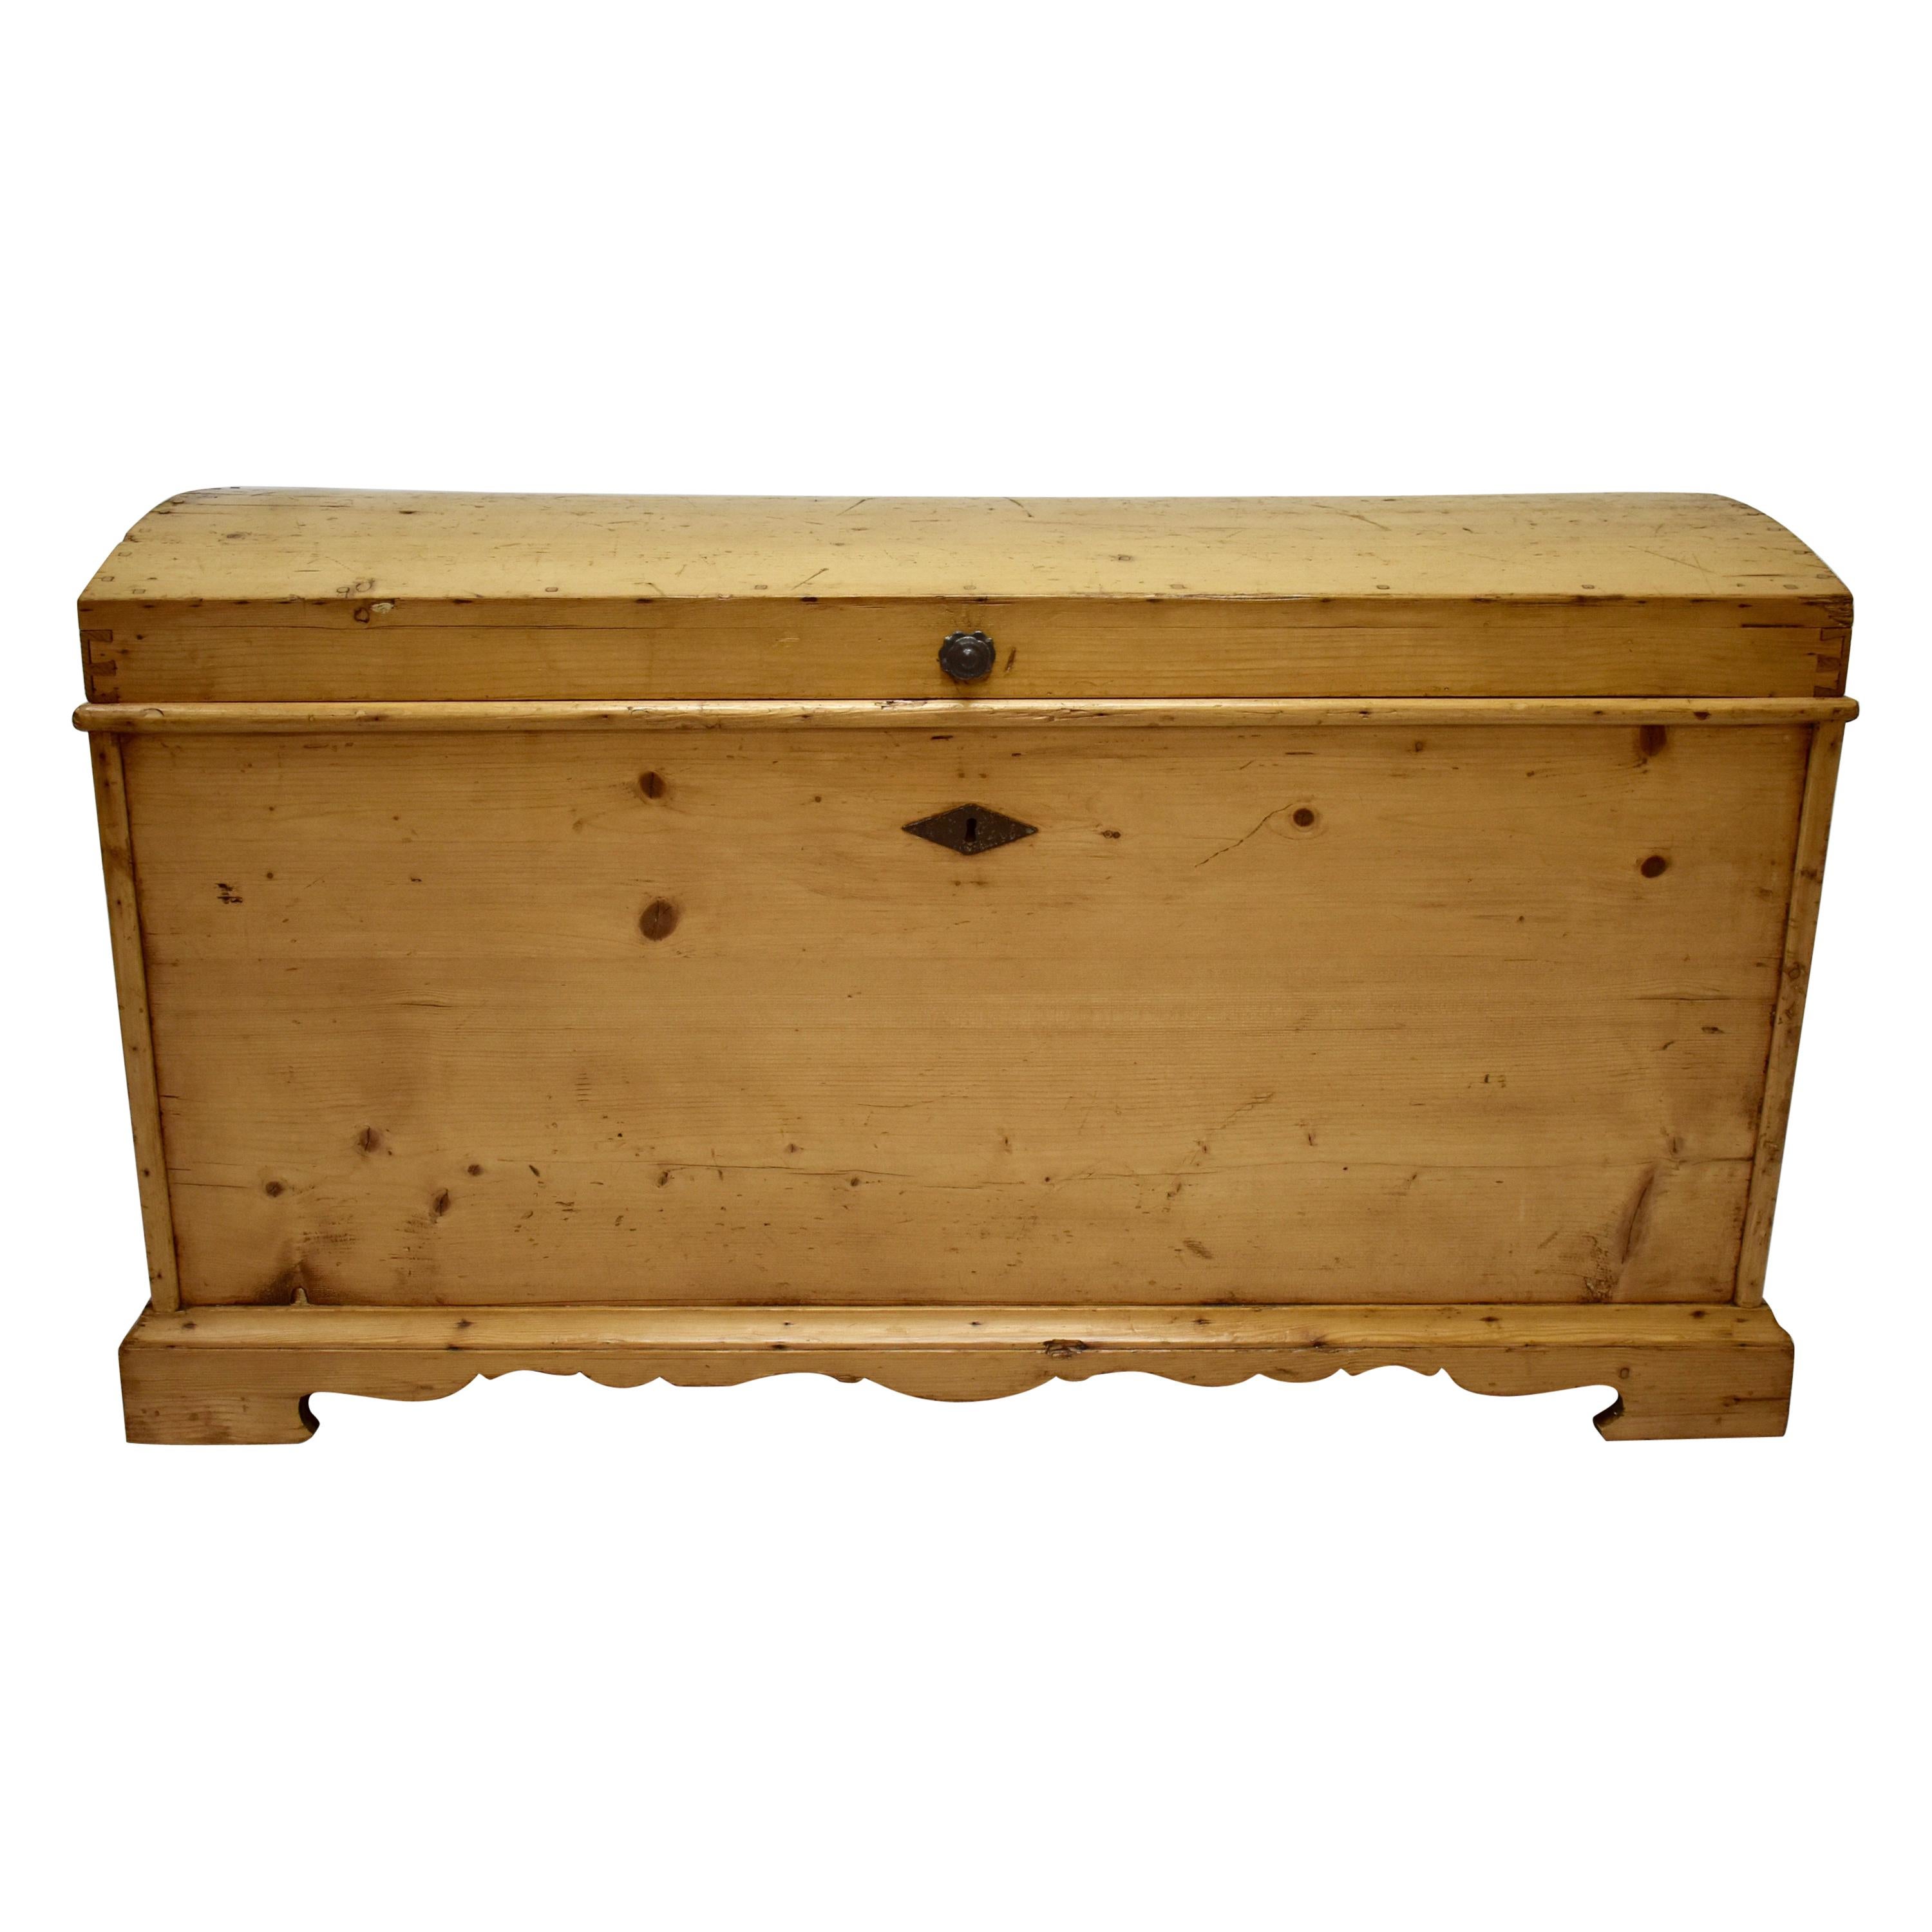 Massive Pine Cedar-Lined Dome-Top Trunk or Blanket Chest